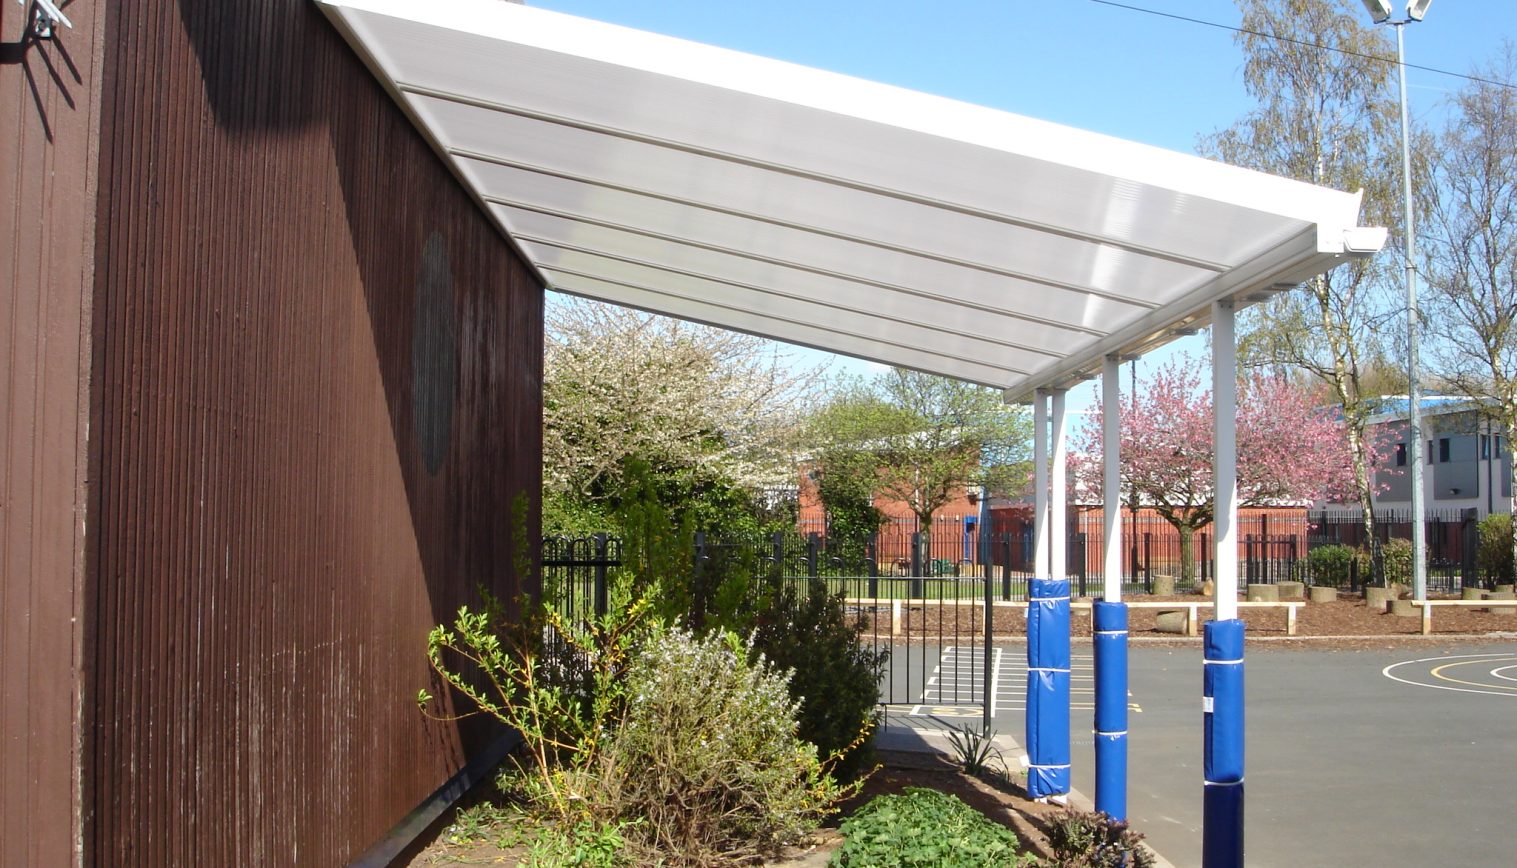 Partlington Primary School – Wall Mounted Canopy